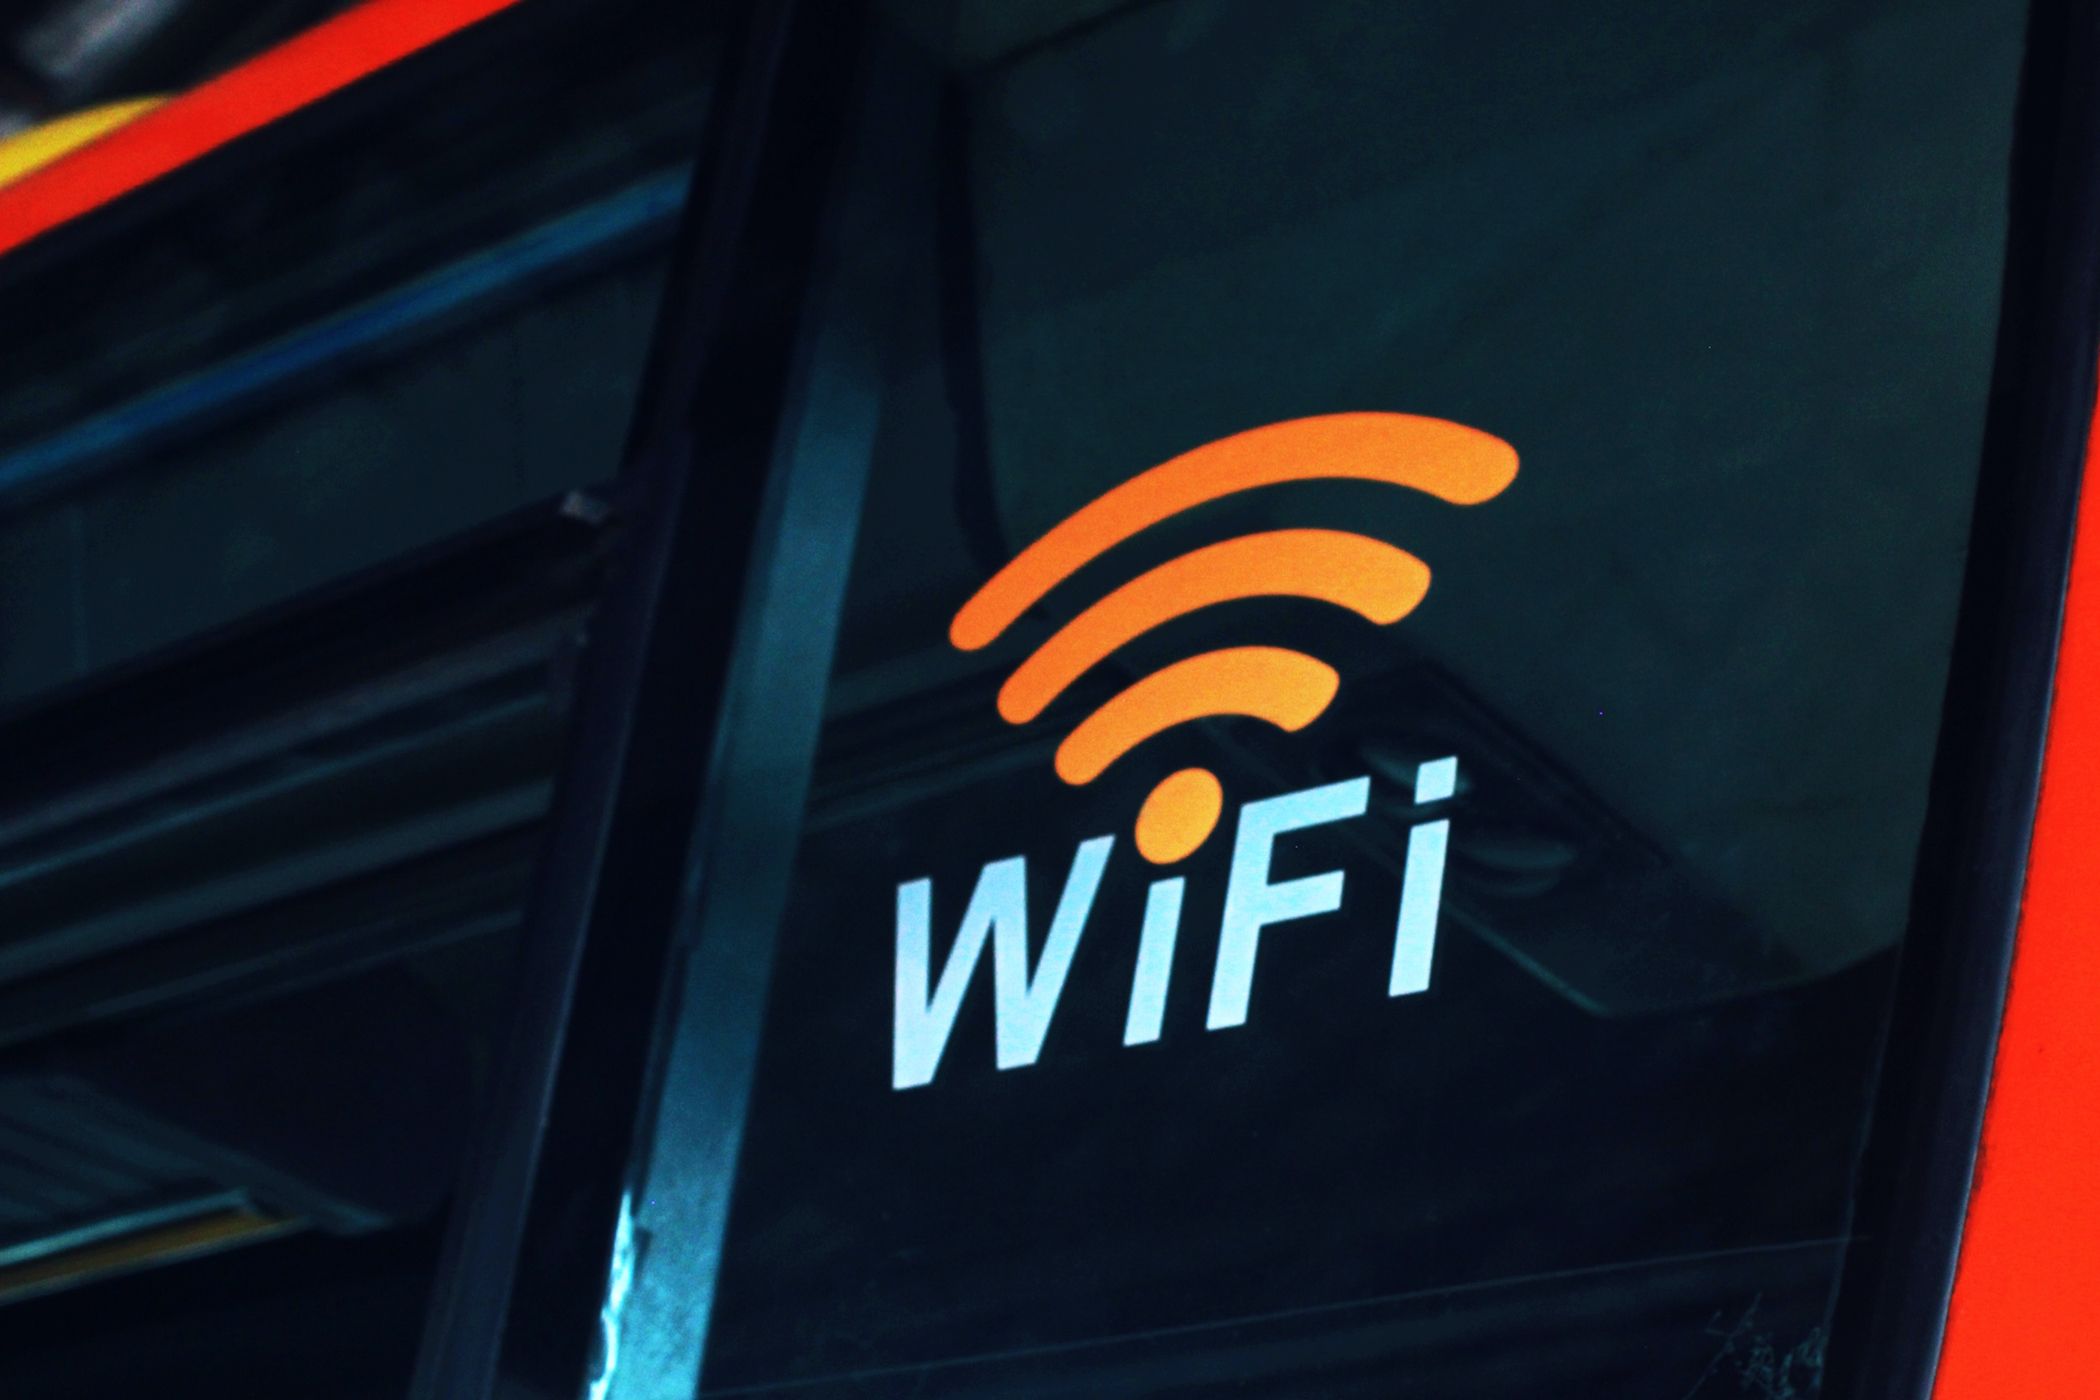 A photo of the Wi-Fi logo